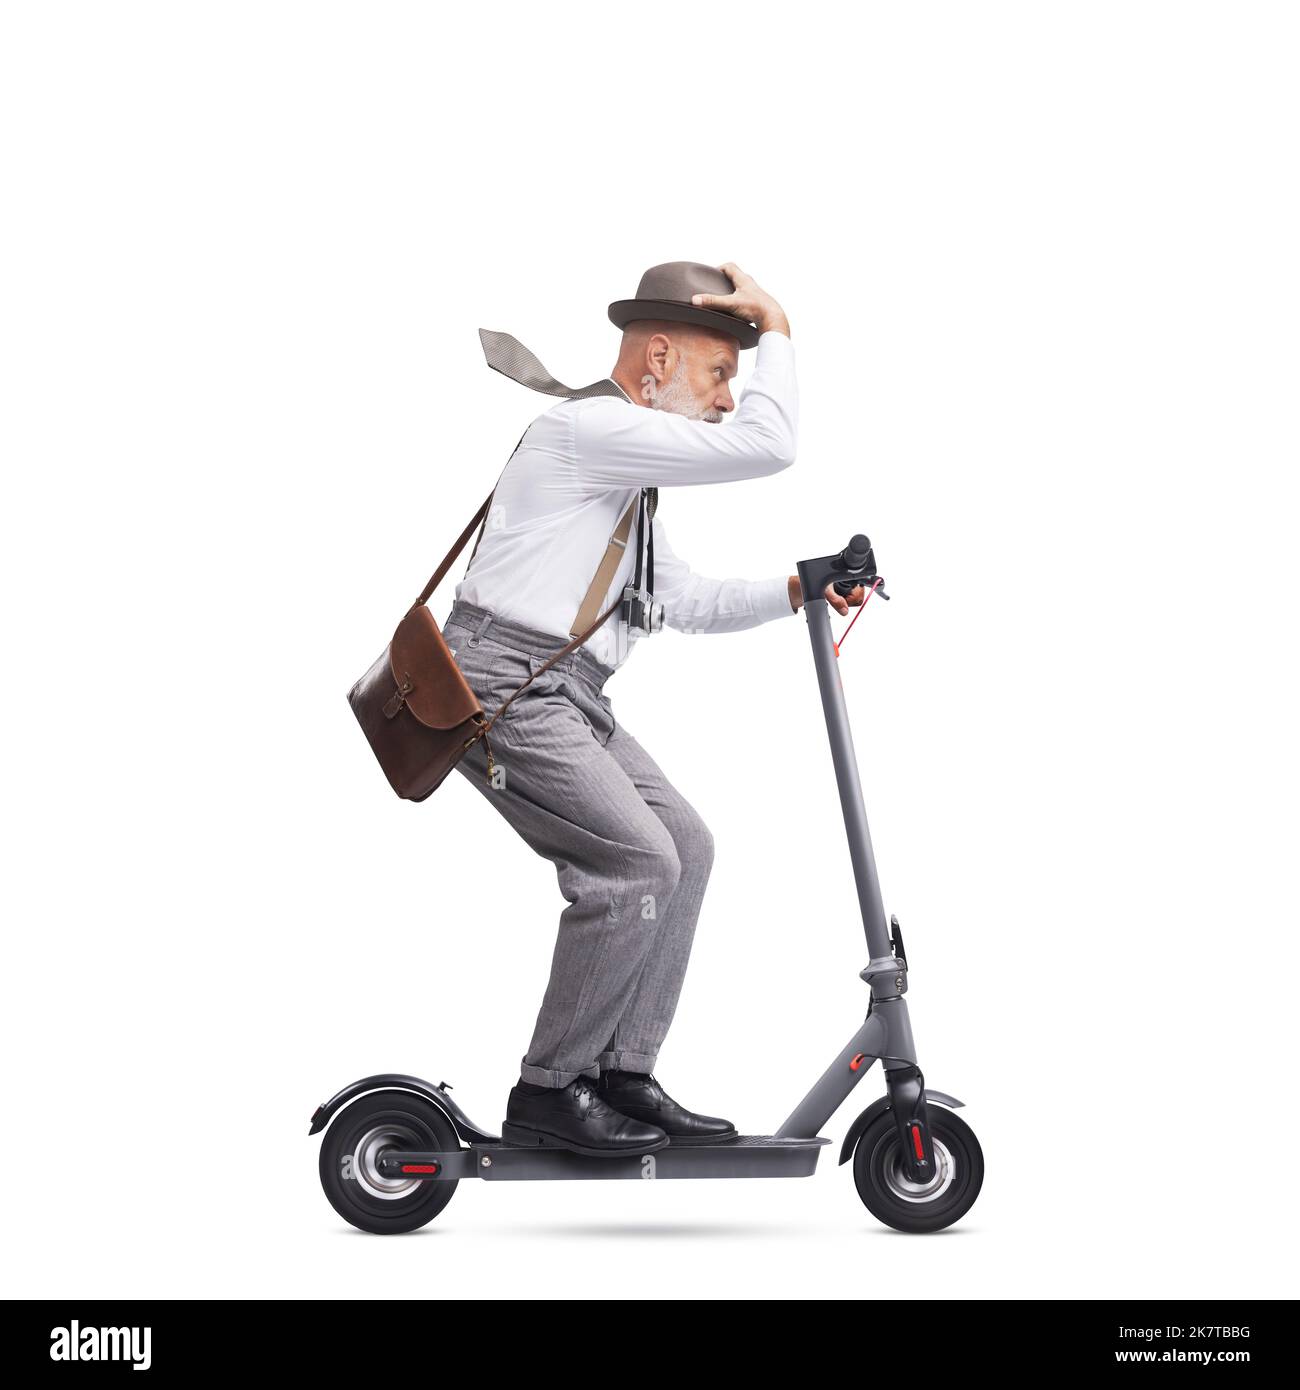 Confident vintage style photographer with hat riding a fast scooter, isolated on white background Stock Photo